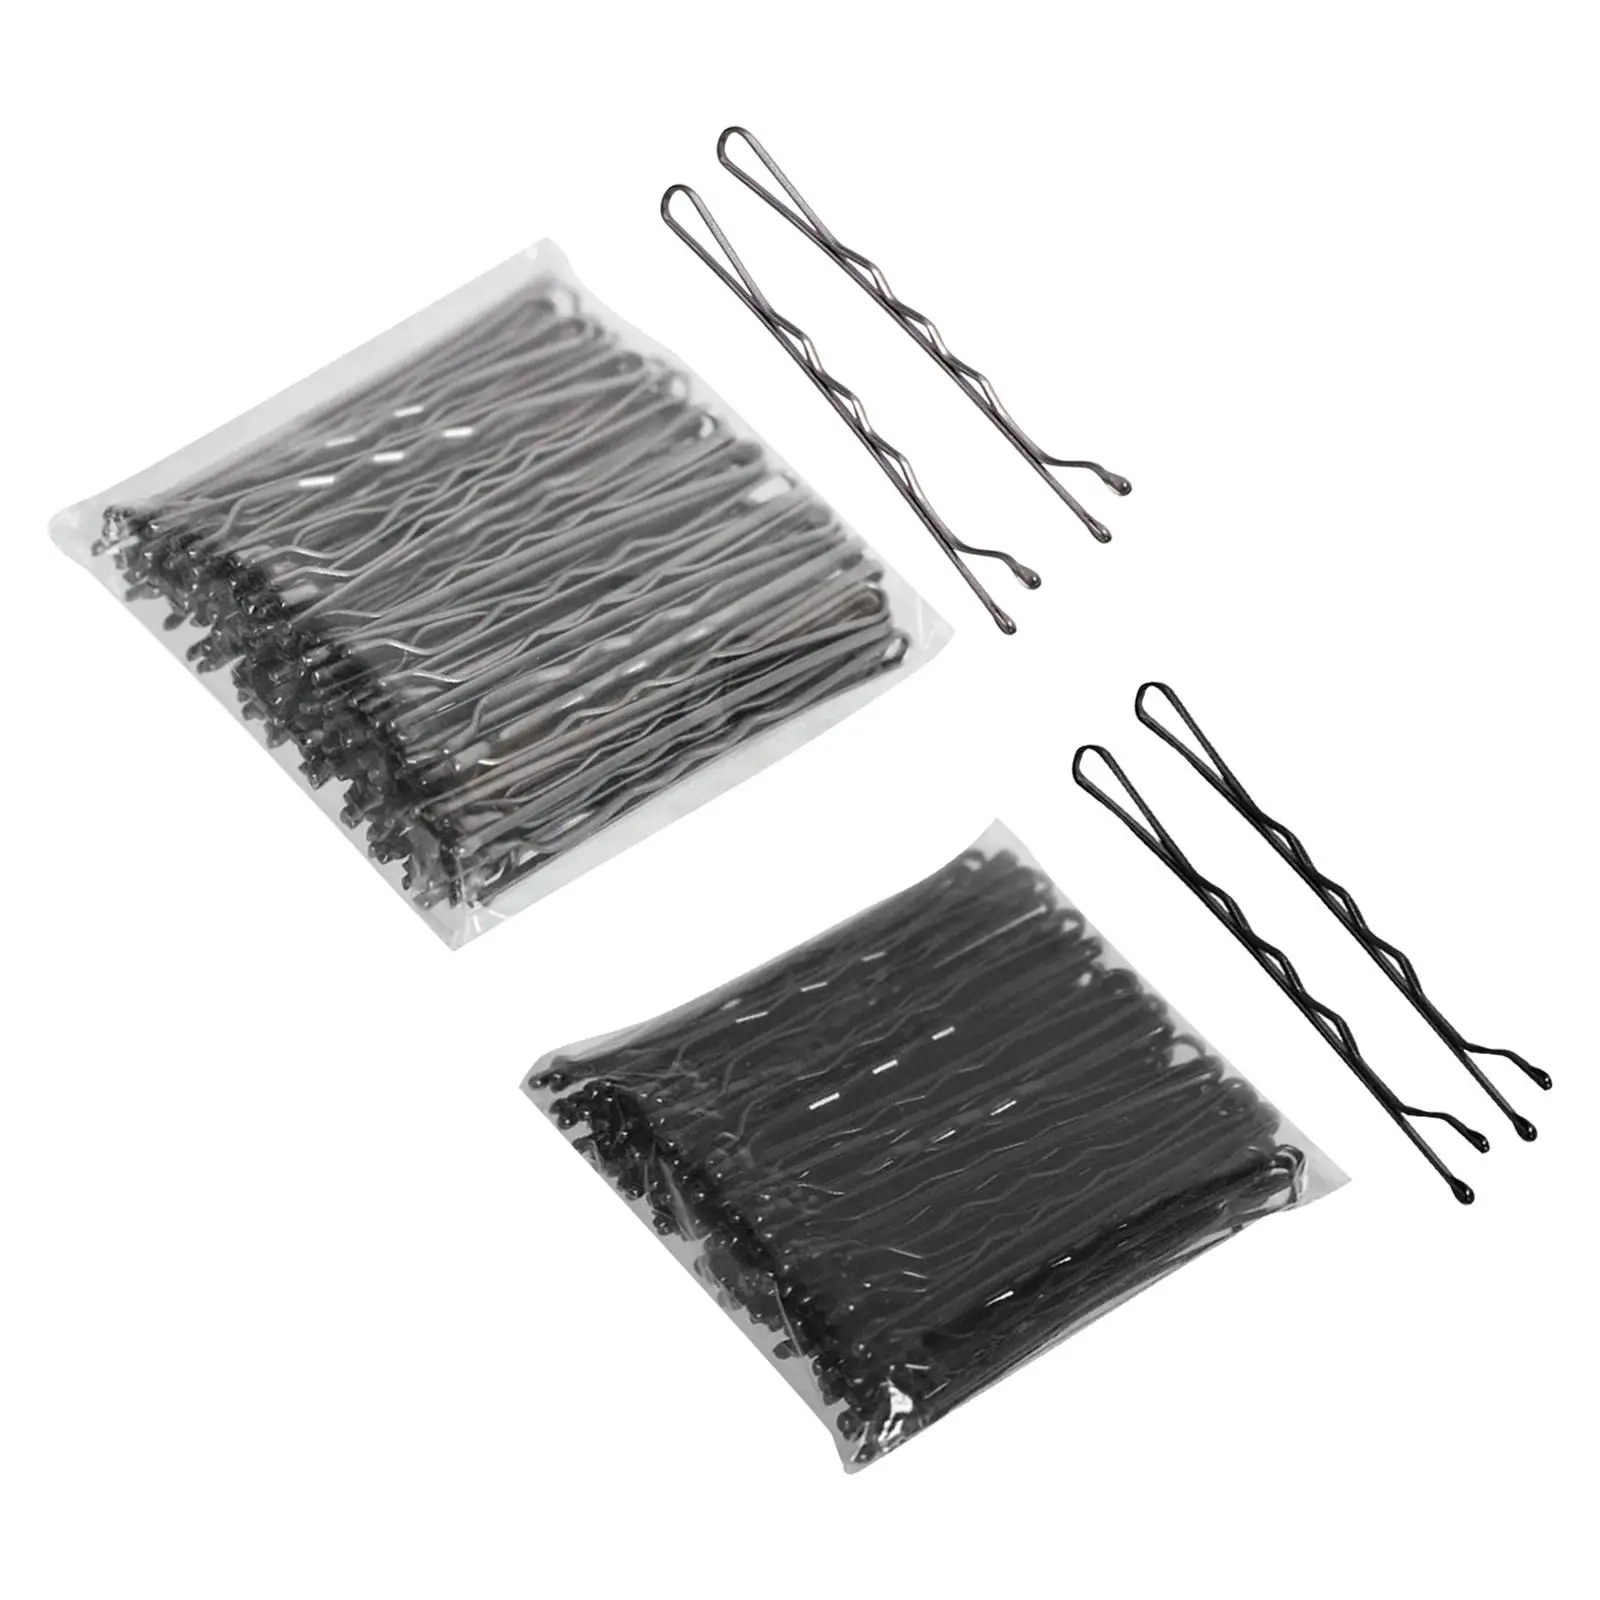 100Pcs Hair Pin Keep Hairs in Place Hair Accessories for Salon Hairstyling Hairdressing Lady